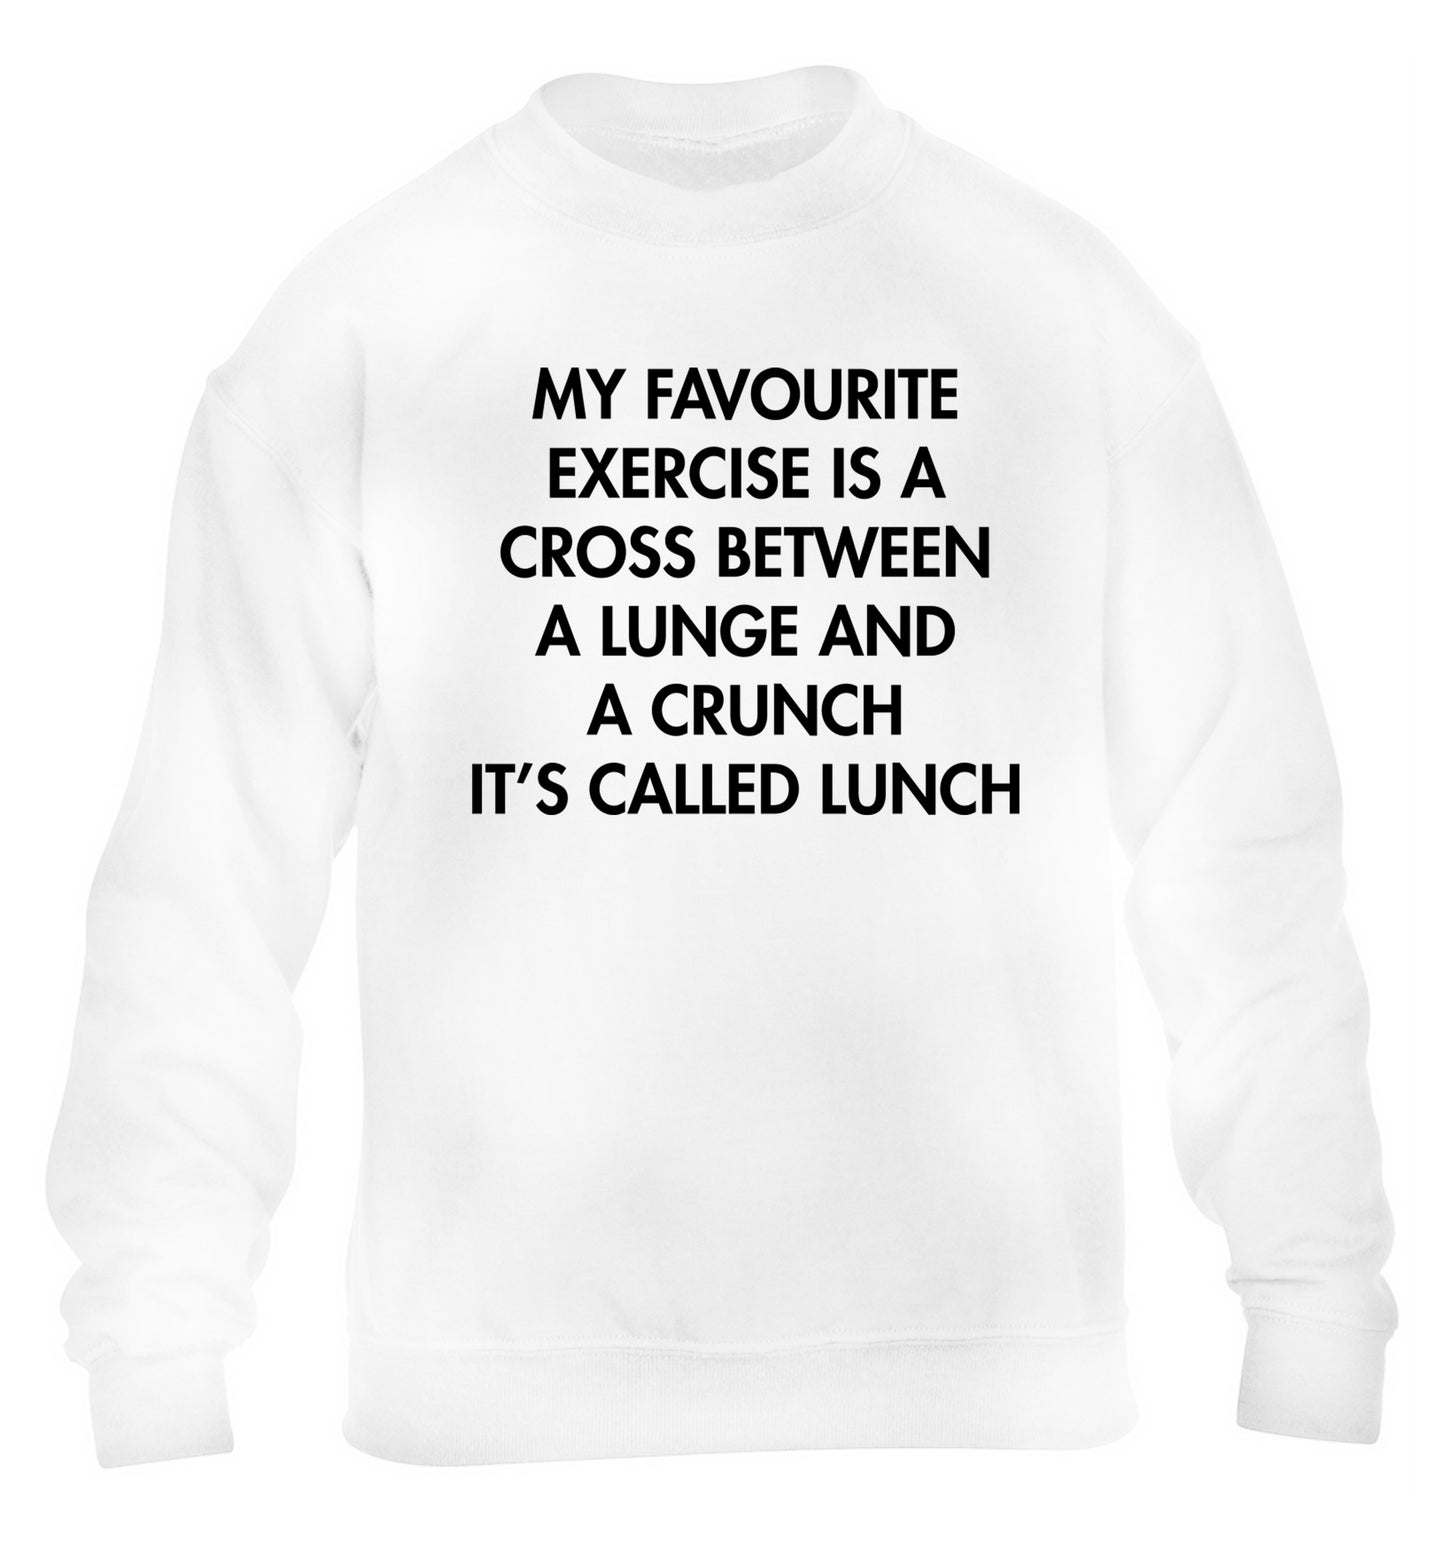 My favourite exercise is a cross between a lung and a crunch it's called lunch children's white sweater 12-14 Years